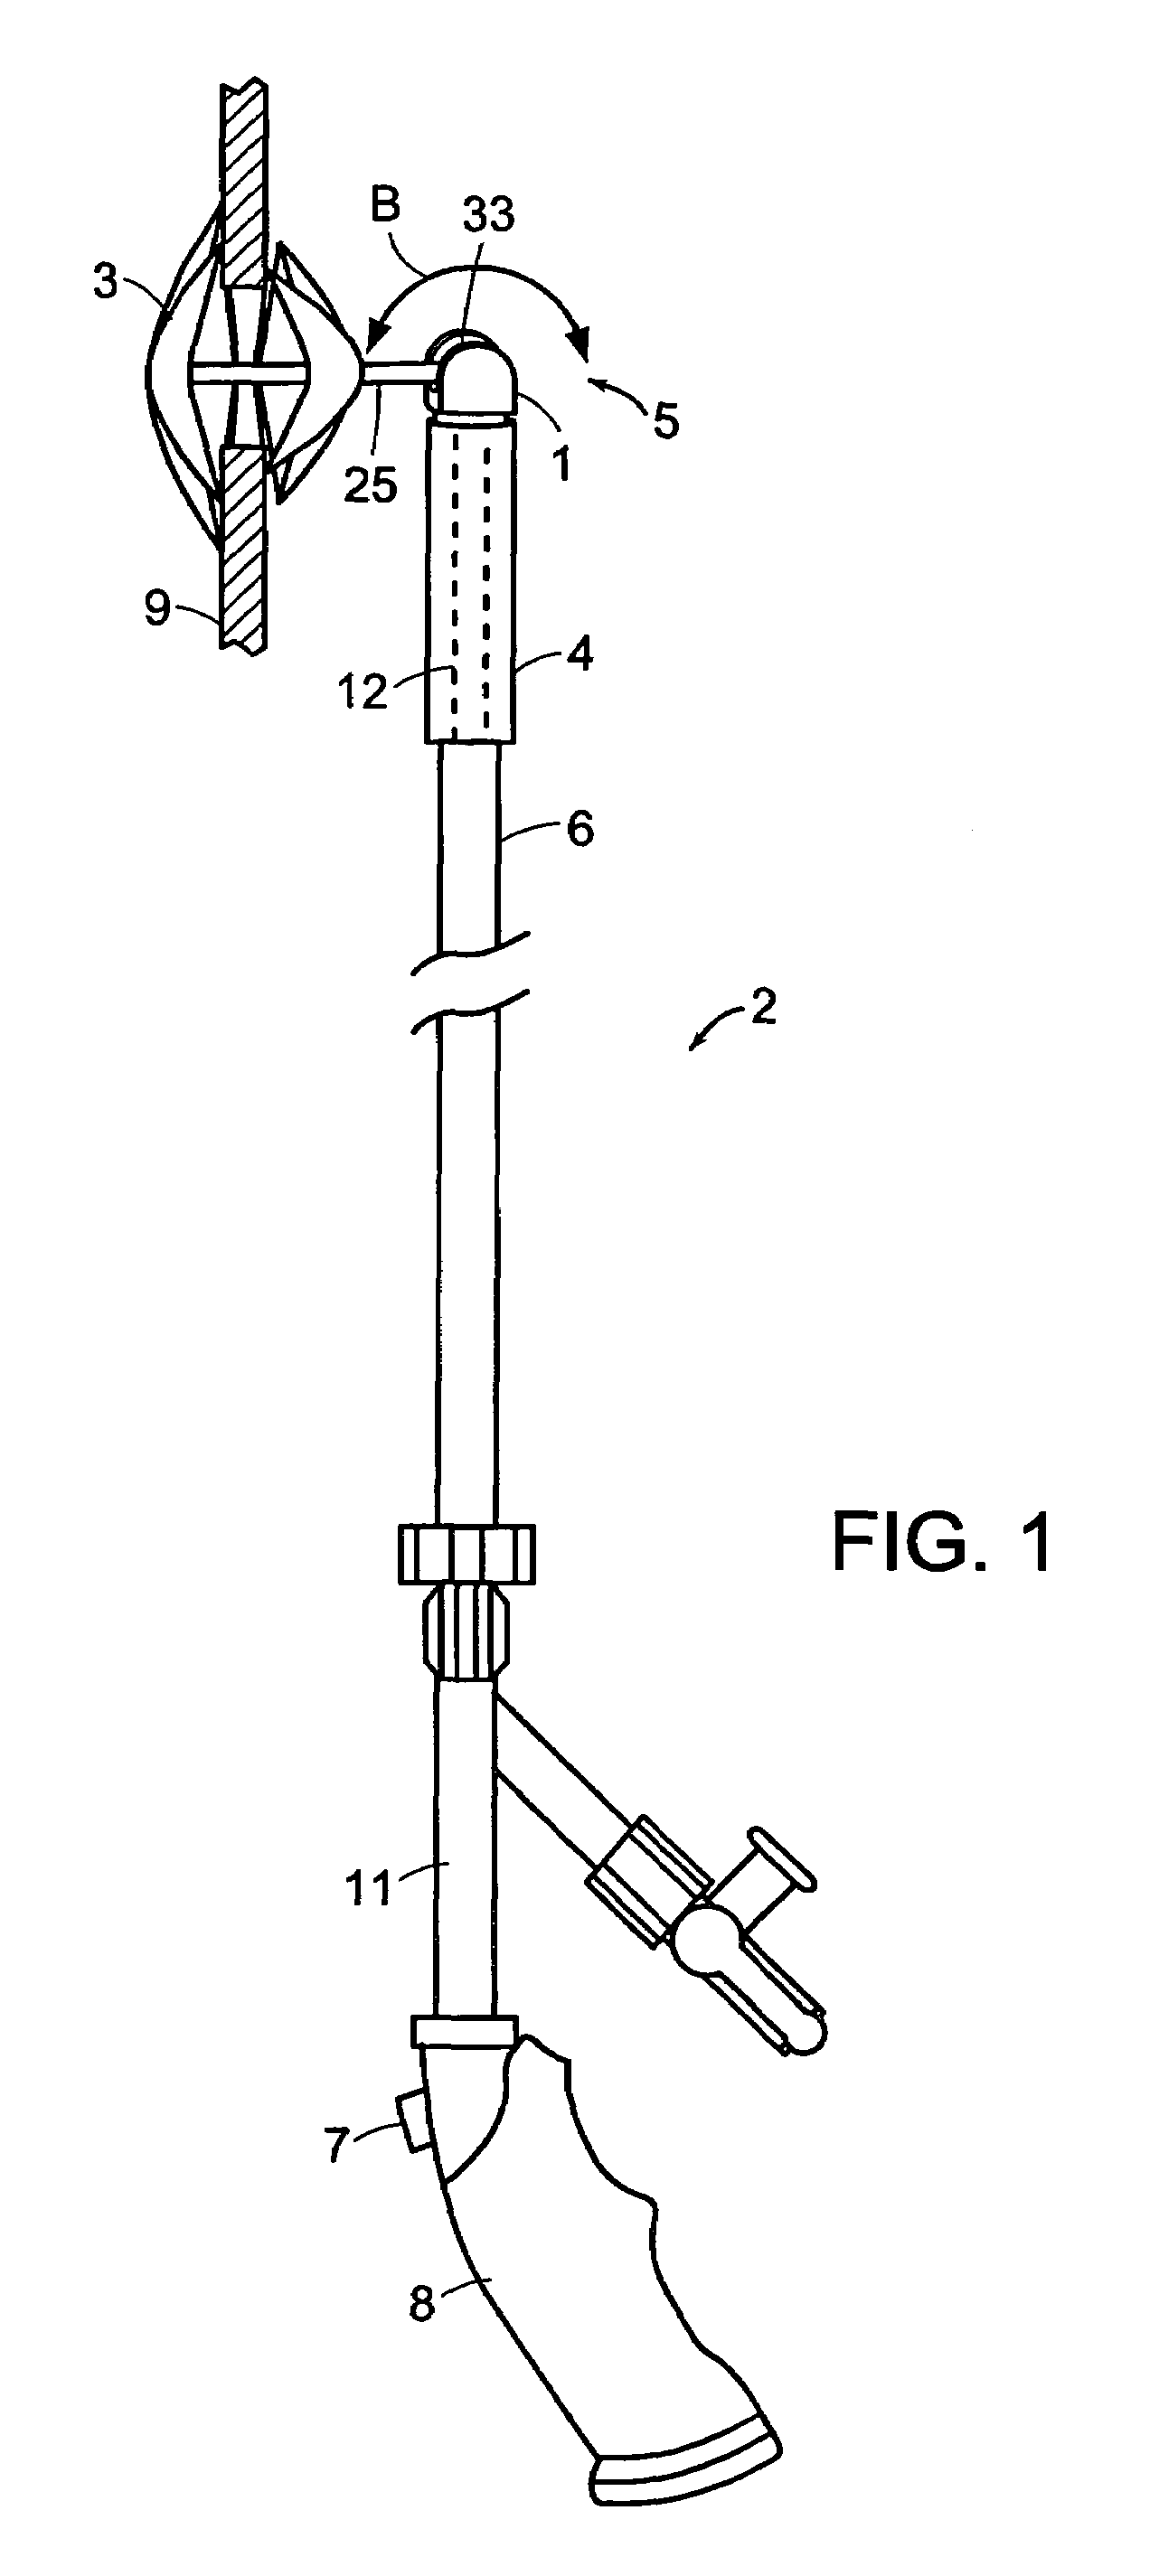 Coupling system useful in placement of implants